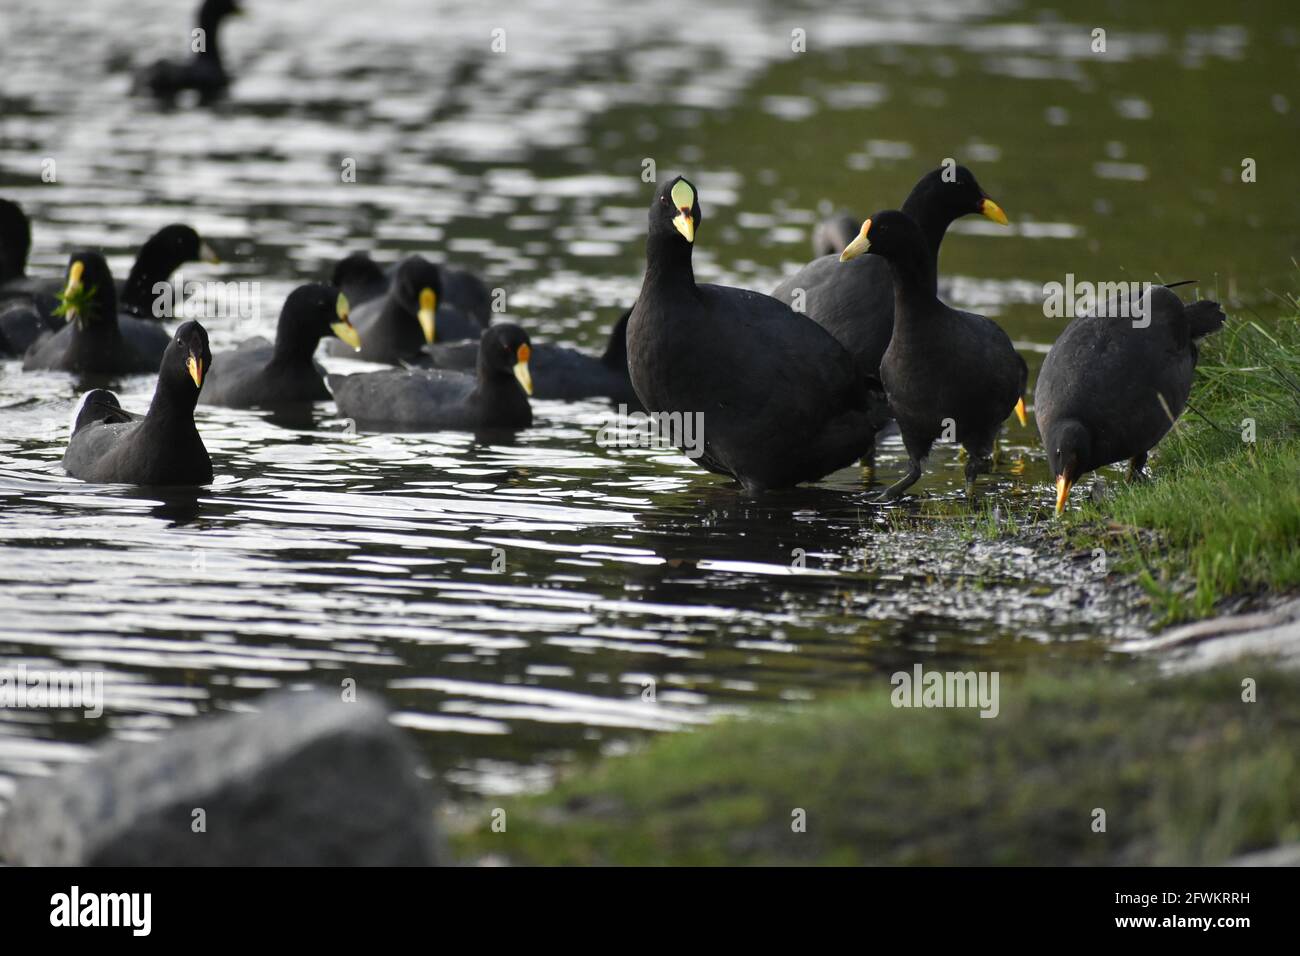 group of different kinds of coot: red-gartered coot (Fulica armillata), red-fronted coot (Fulica rufifrons) and white-winged coot (Fulica leucoptera), Stock Photo